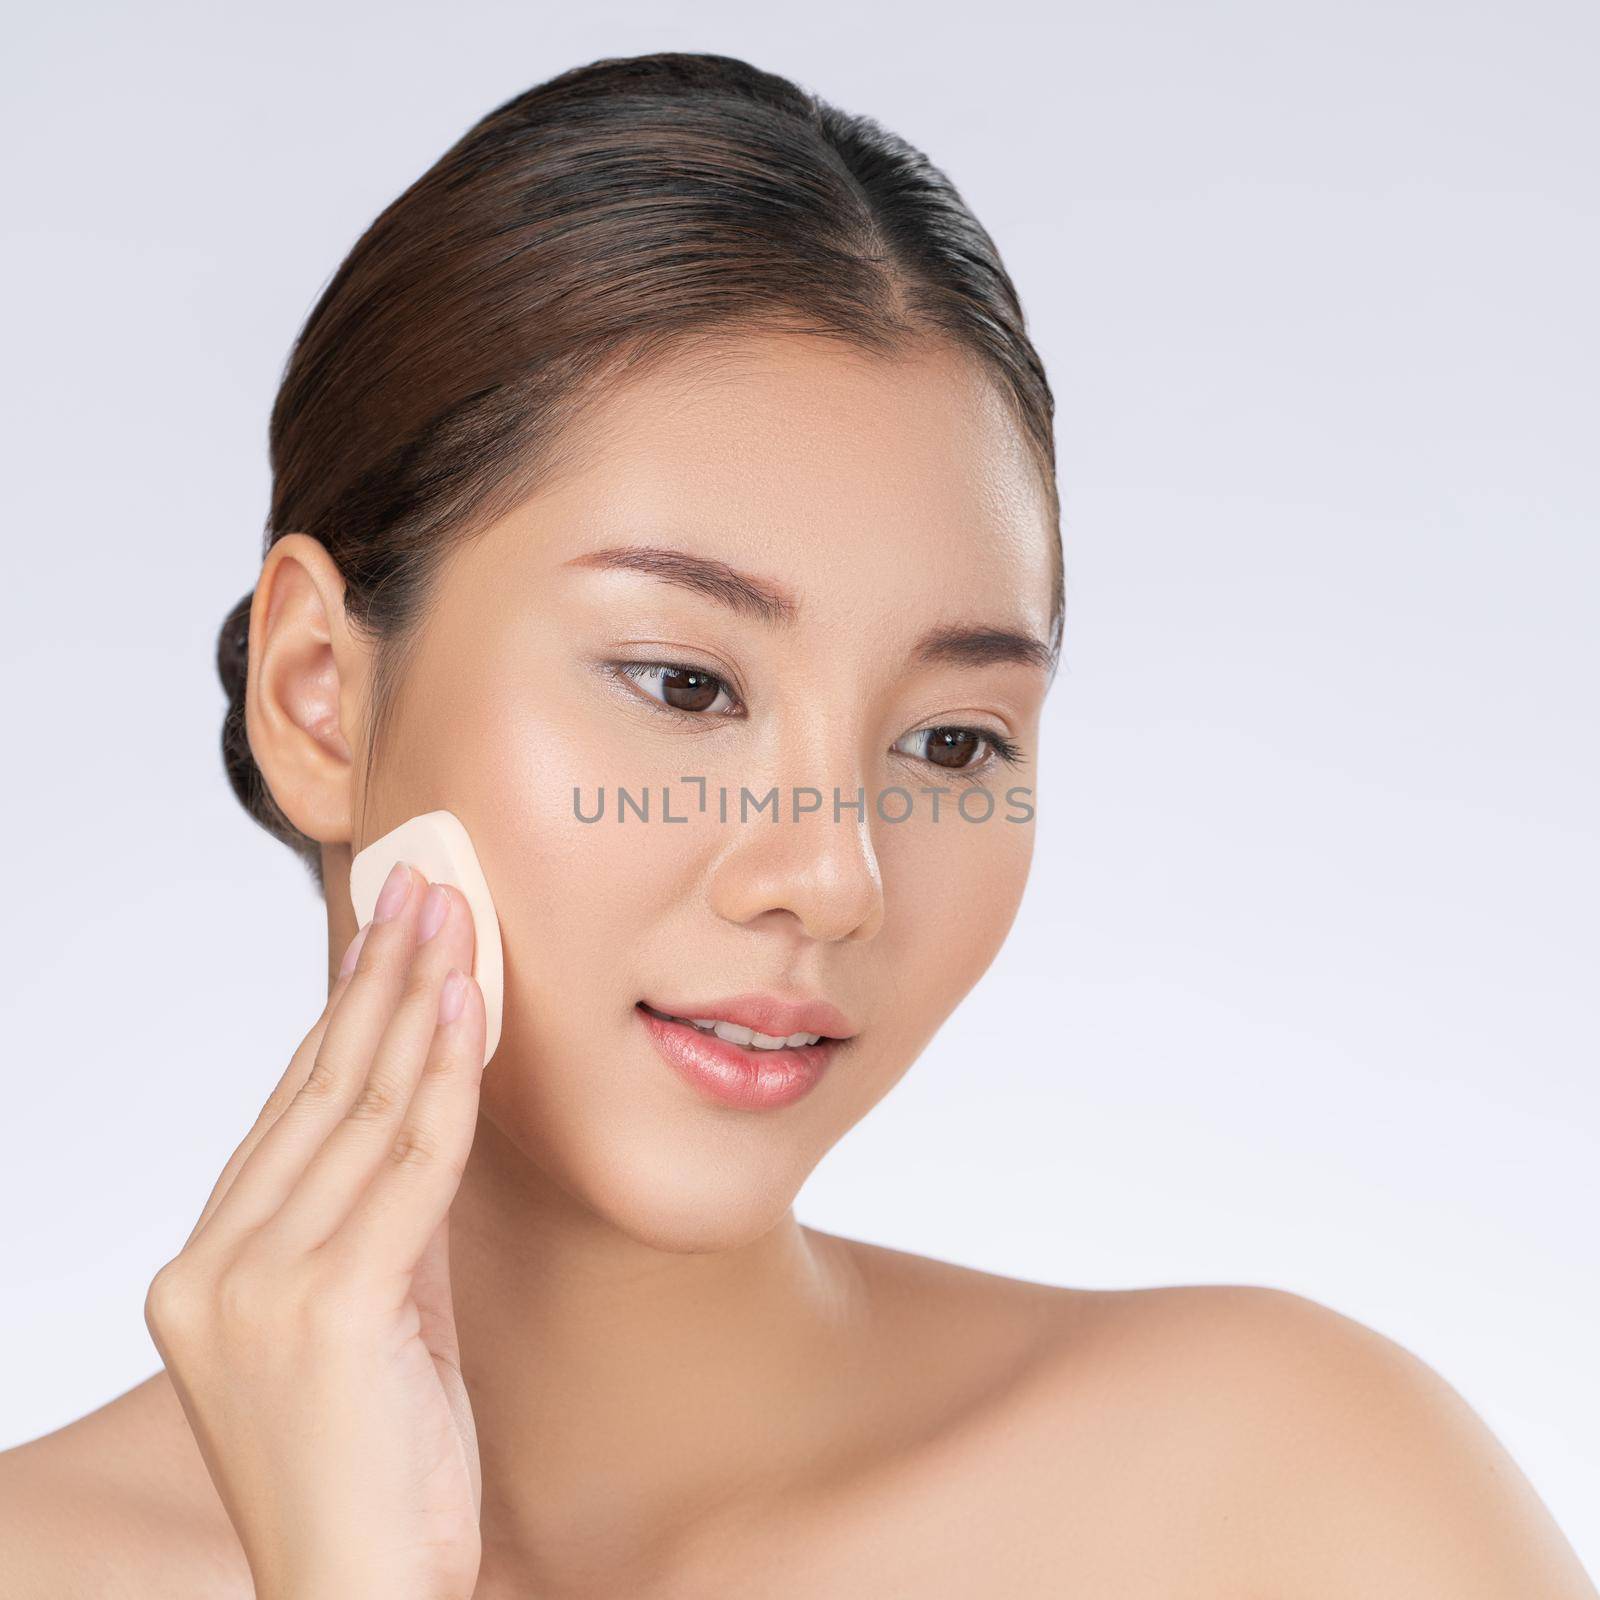 Gorgeous woman applying her cheek with dry powder. Portrait of younger with perfect makeup and healthy skin concept.